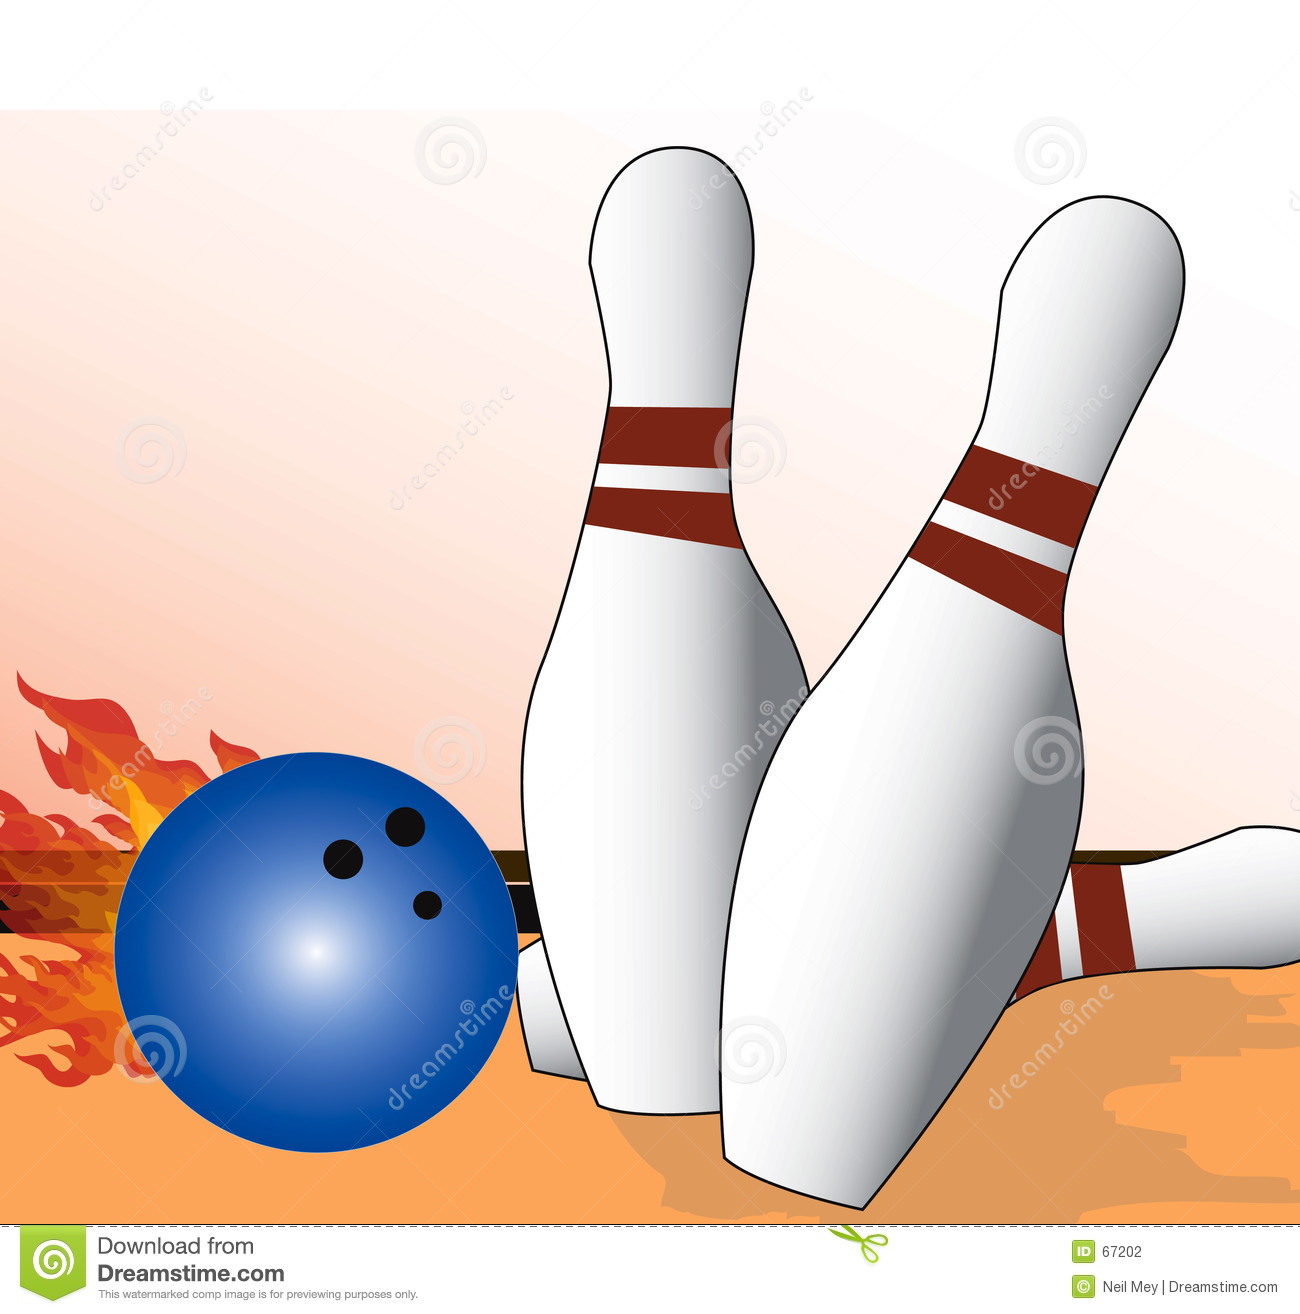 Flaming Bowling Ball Hitting Pins On The Alley Clip Art Illustration